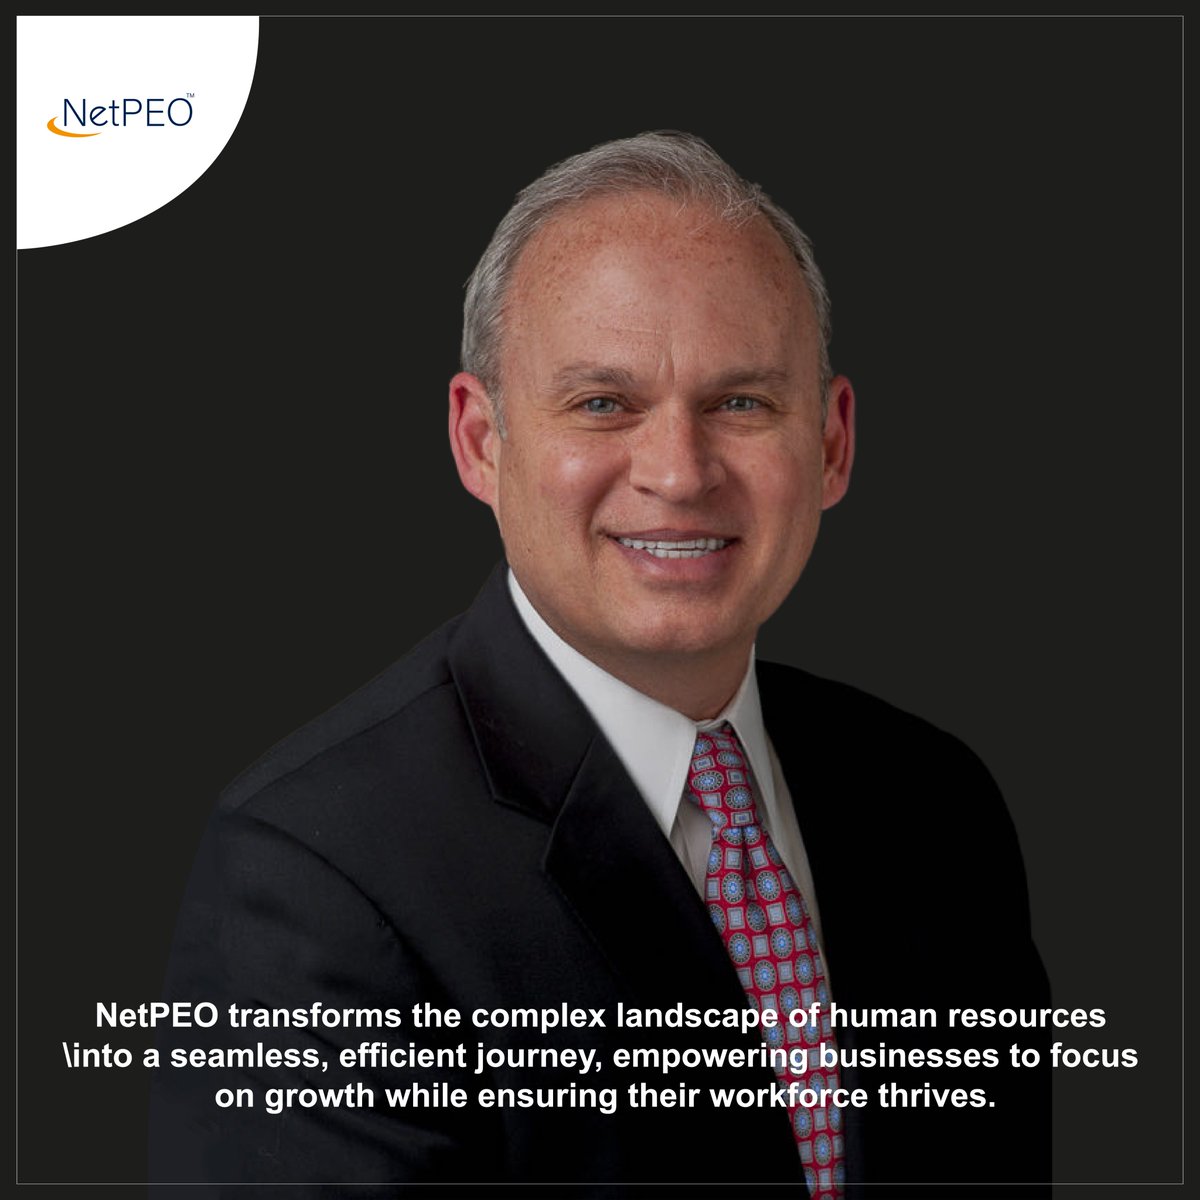 Join with us- netpeo.com
#HRRevolution #PEOInsights #EmployeeExperience #HRInnovations #WorkforceSolutions #PEOAdvantage #HRTransformation #BusinessGrowth #OutsourcingSolutions #HRLeadership #EmploymentServices #WorkplaceWellness #PEOExperts #HRConsulting #HRSupport